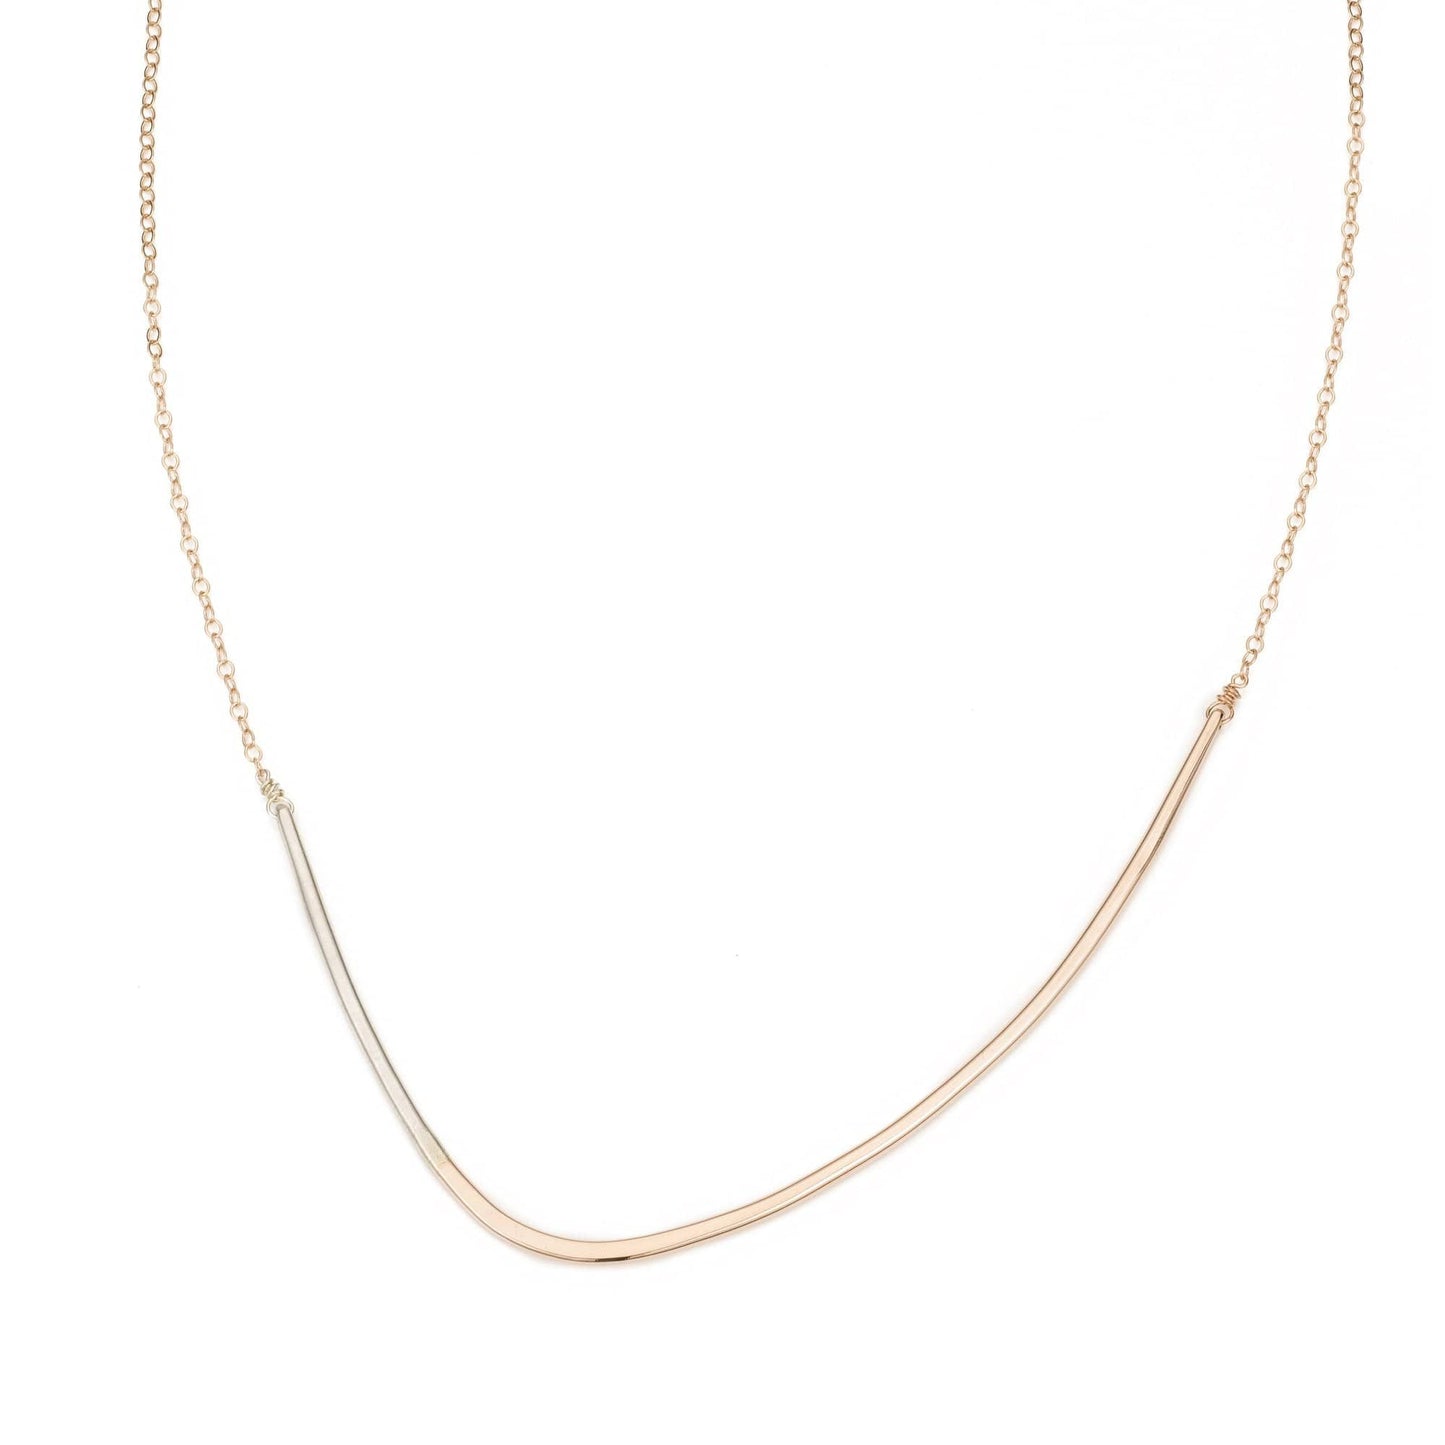 NKL-GF Silver & Gold Inflecto Necklace